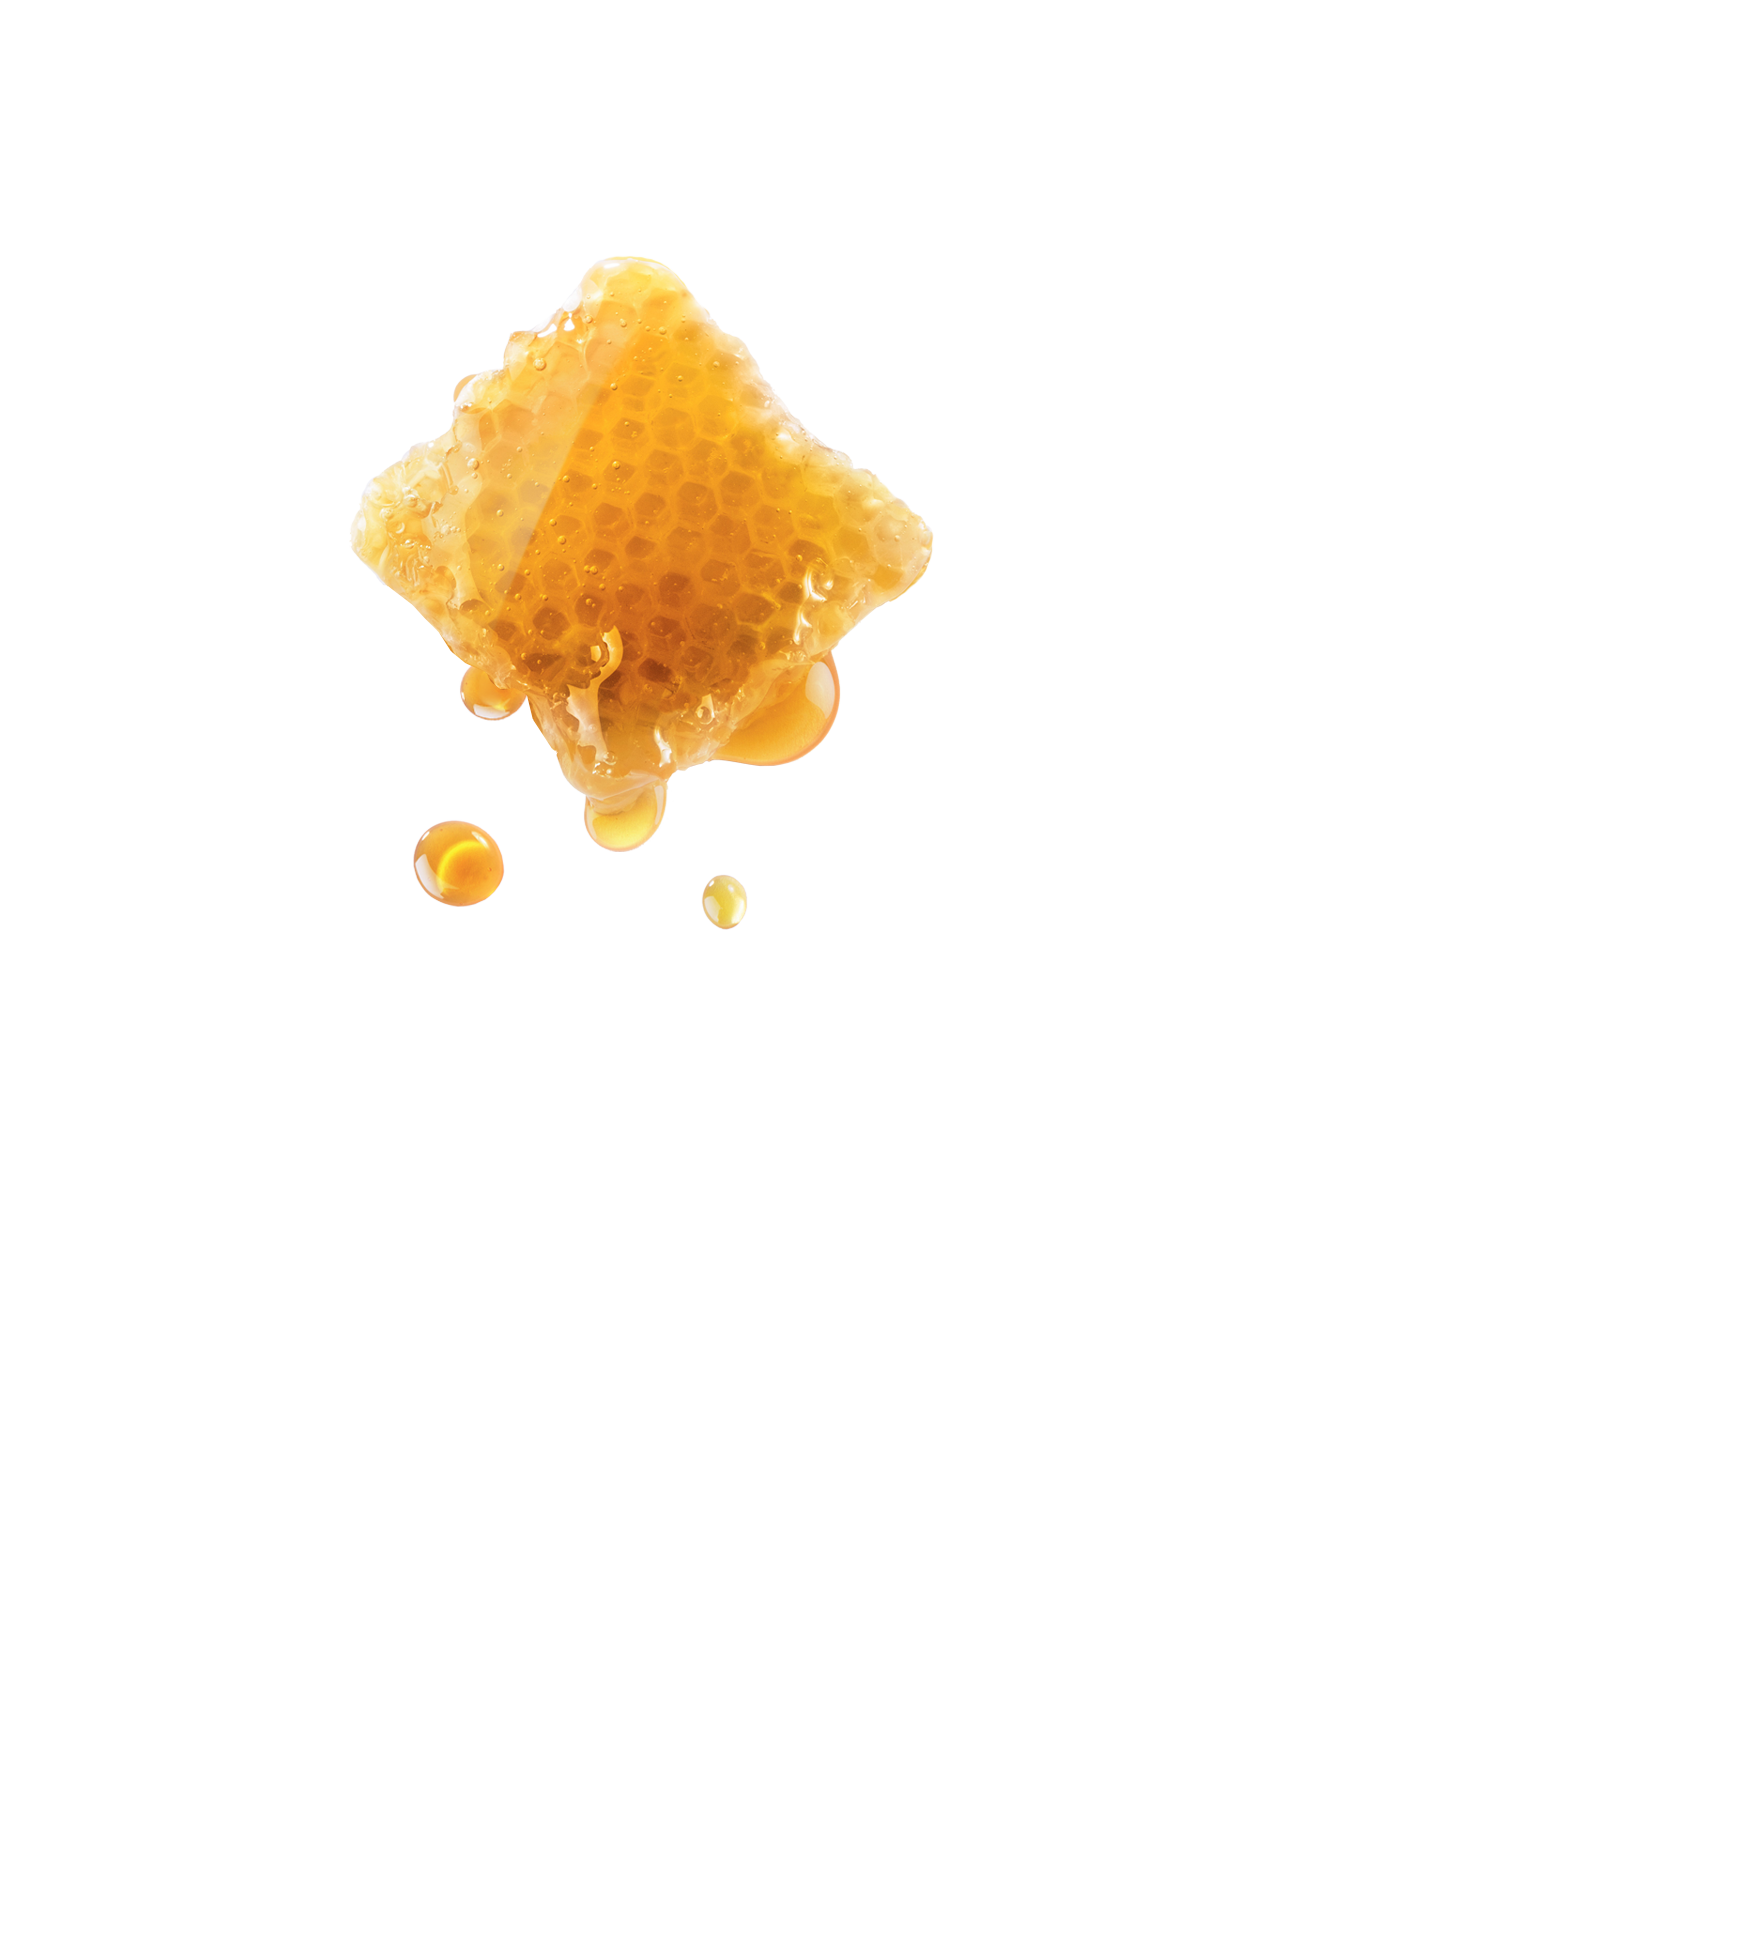 Beeswax for natural pain relief